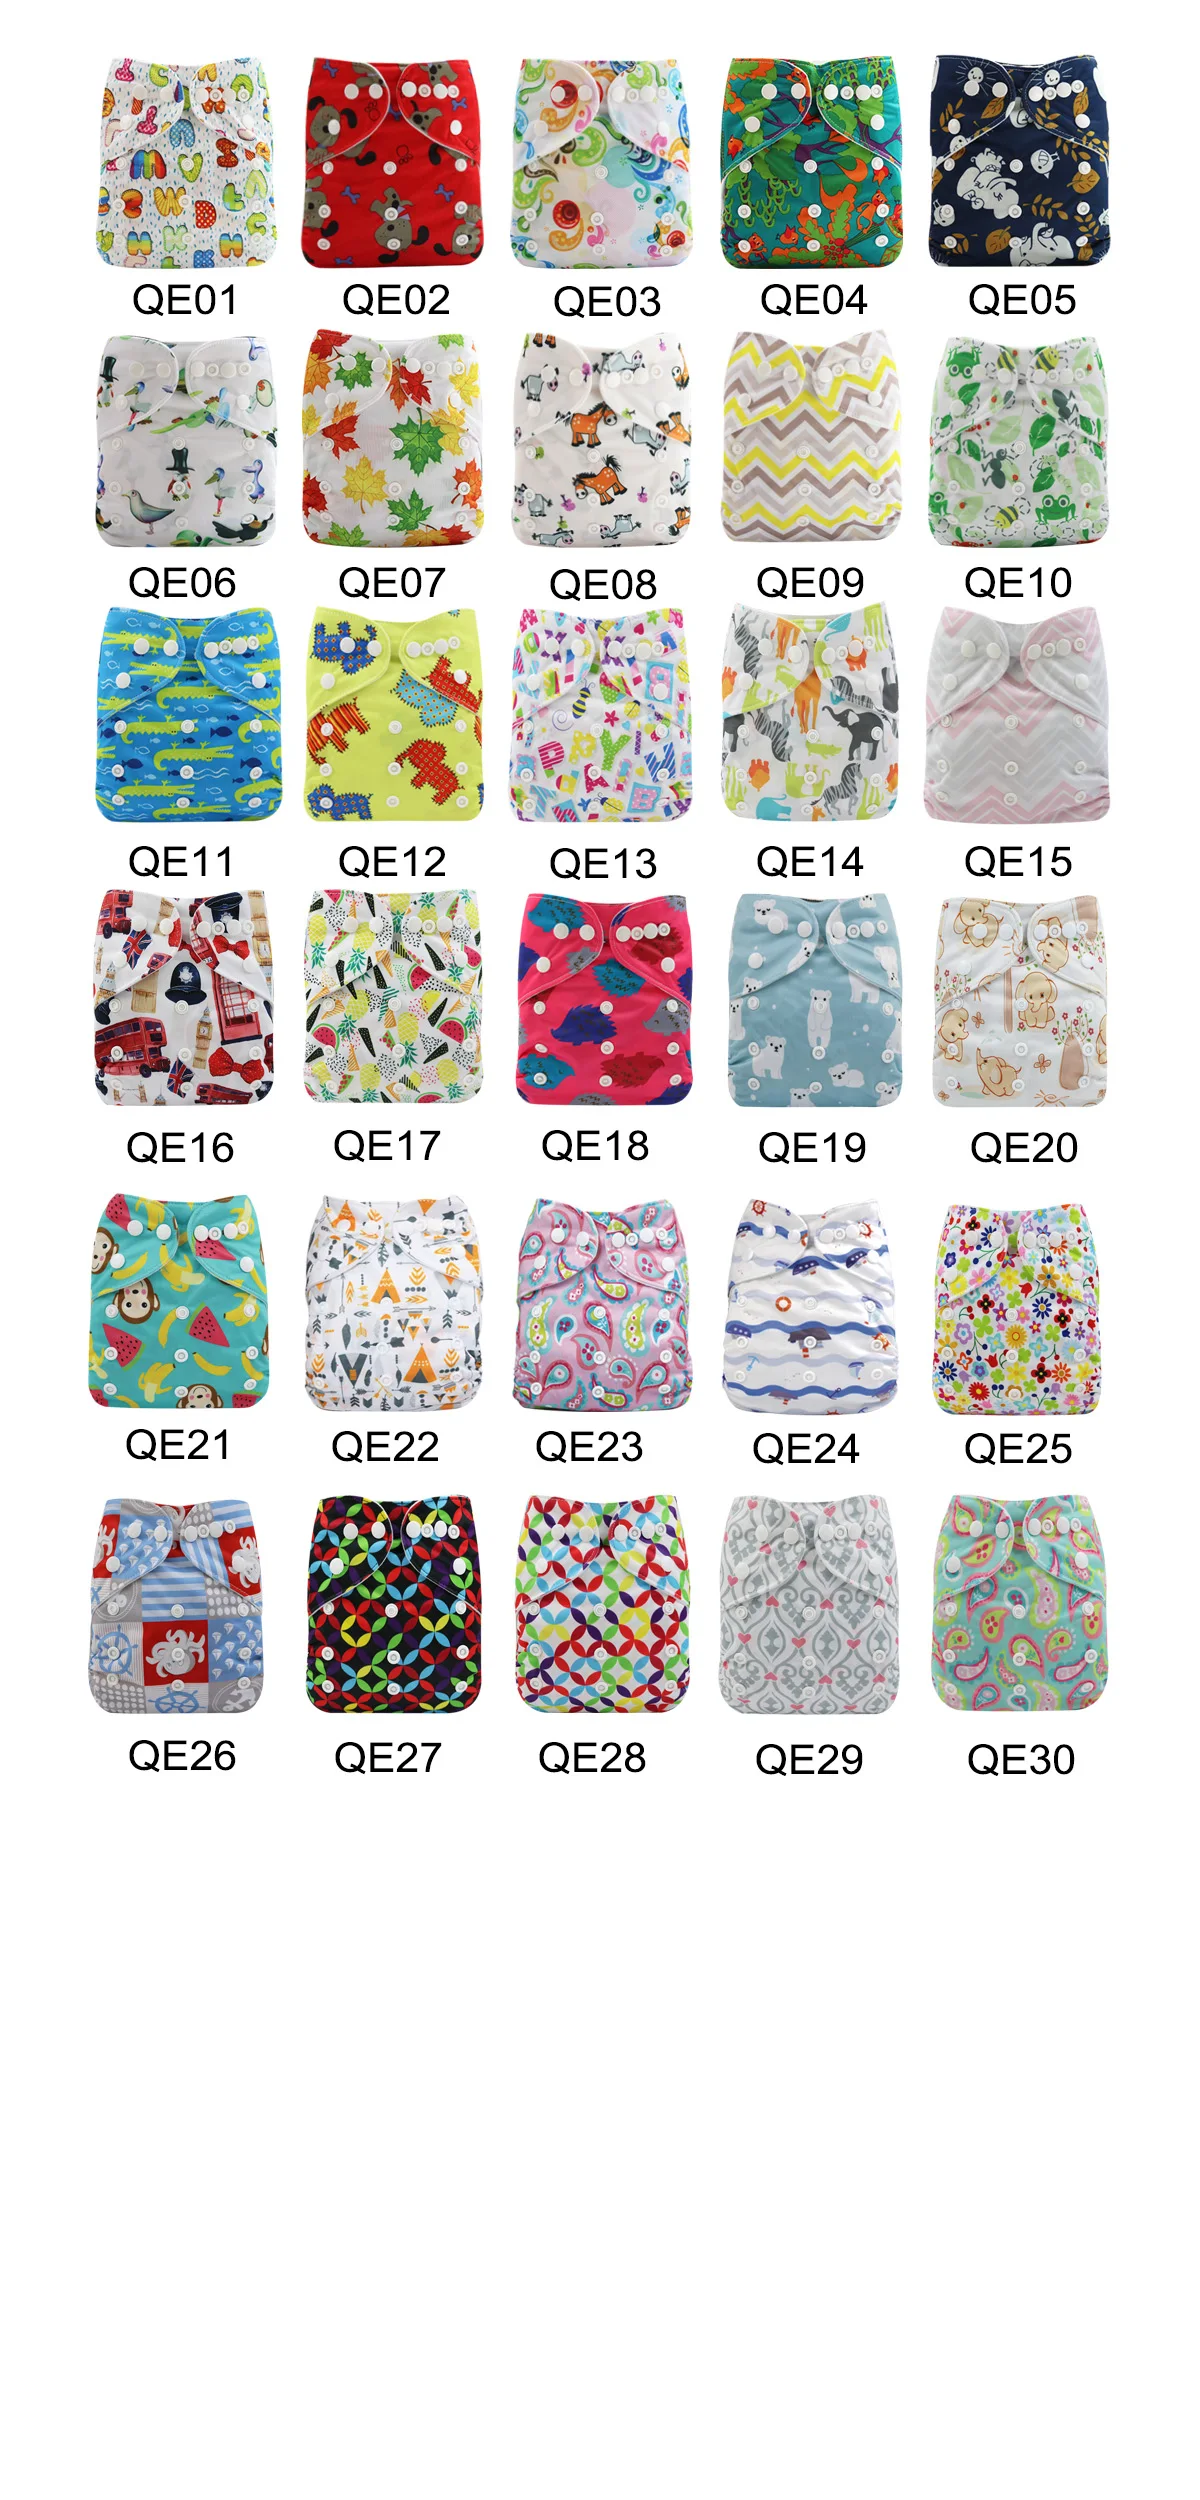 Newest !Baby Ecological Diapers Cloth Reusable Diaper Bebe Washable Pocket Nappy Cover Pul One Size Fits All New Wholesale